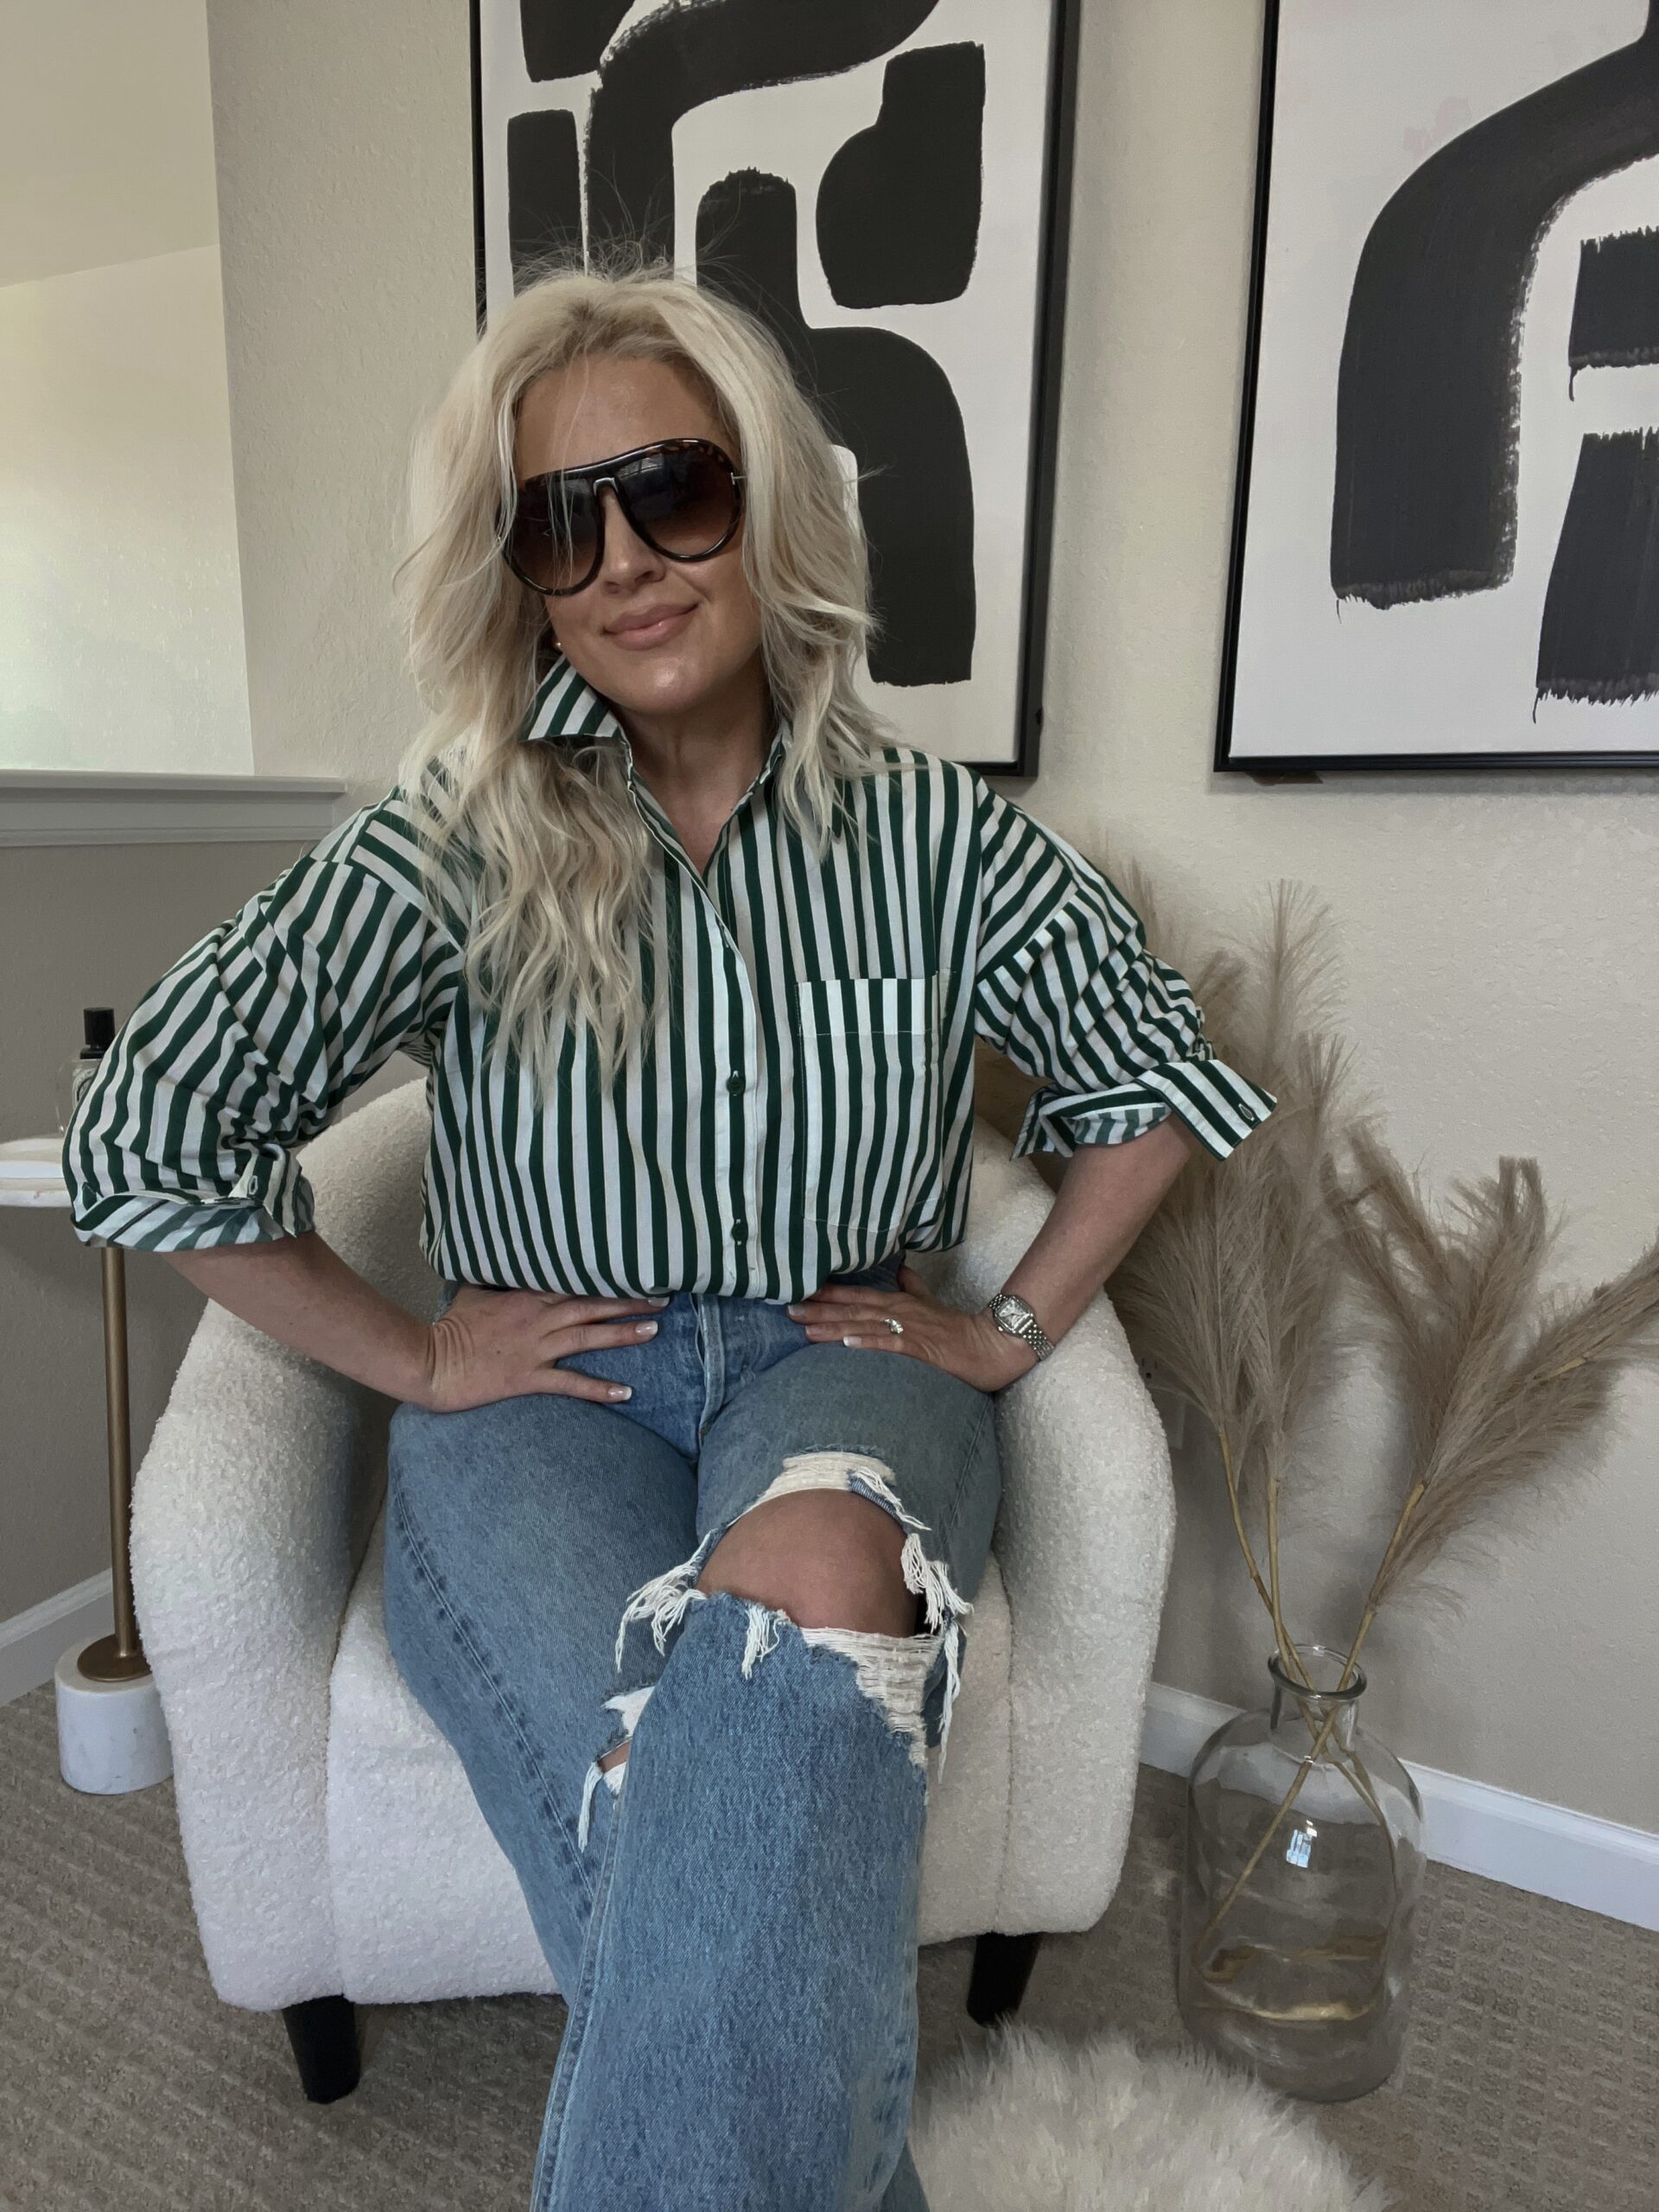 Image of Lindsey Denver wearing a green and white striped top paired with Agolde jeans, showcasing a trendy and stylish outfit.